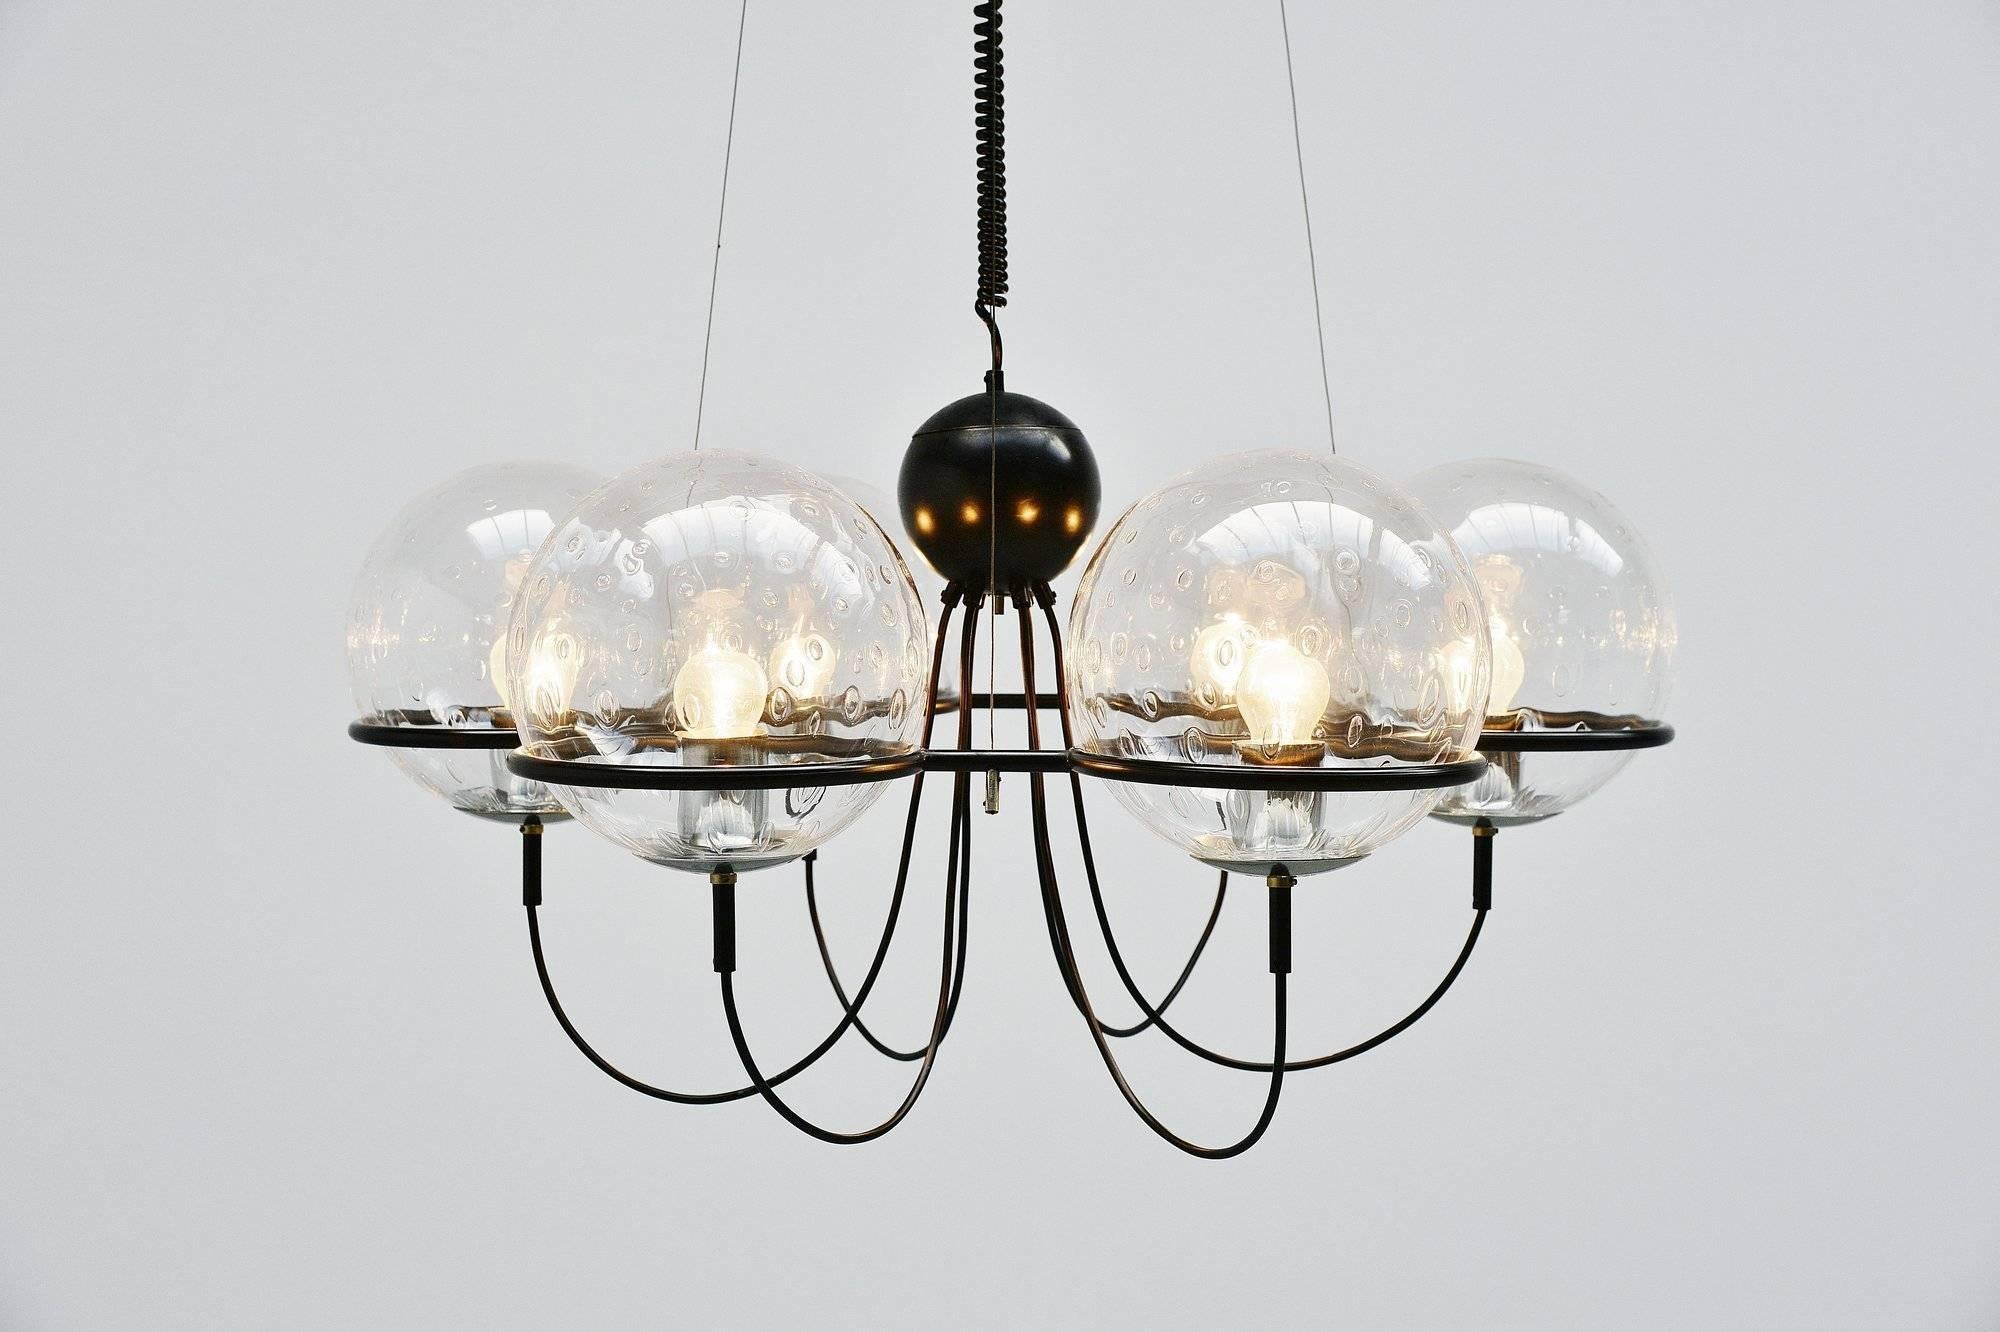 Very nice and impressive chandelier designed and manufactured by Raak Amsterdam, Holland, 1975. This chandelier has a black painted metal frame that supports the glass raindrop globes. The lamp hangs on three wires, we mounted it on a black ceiling